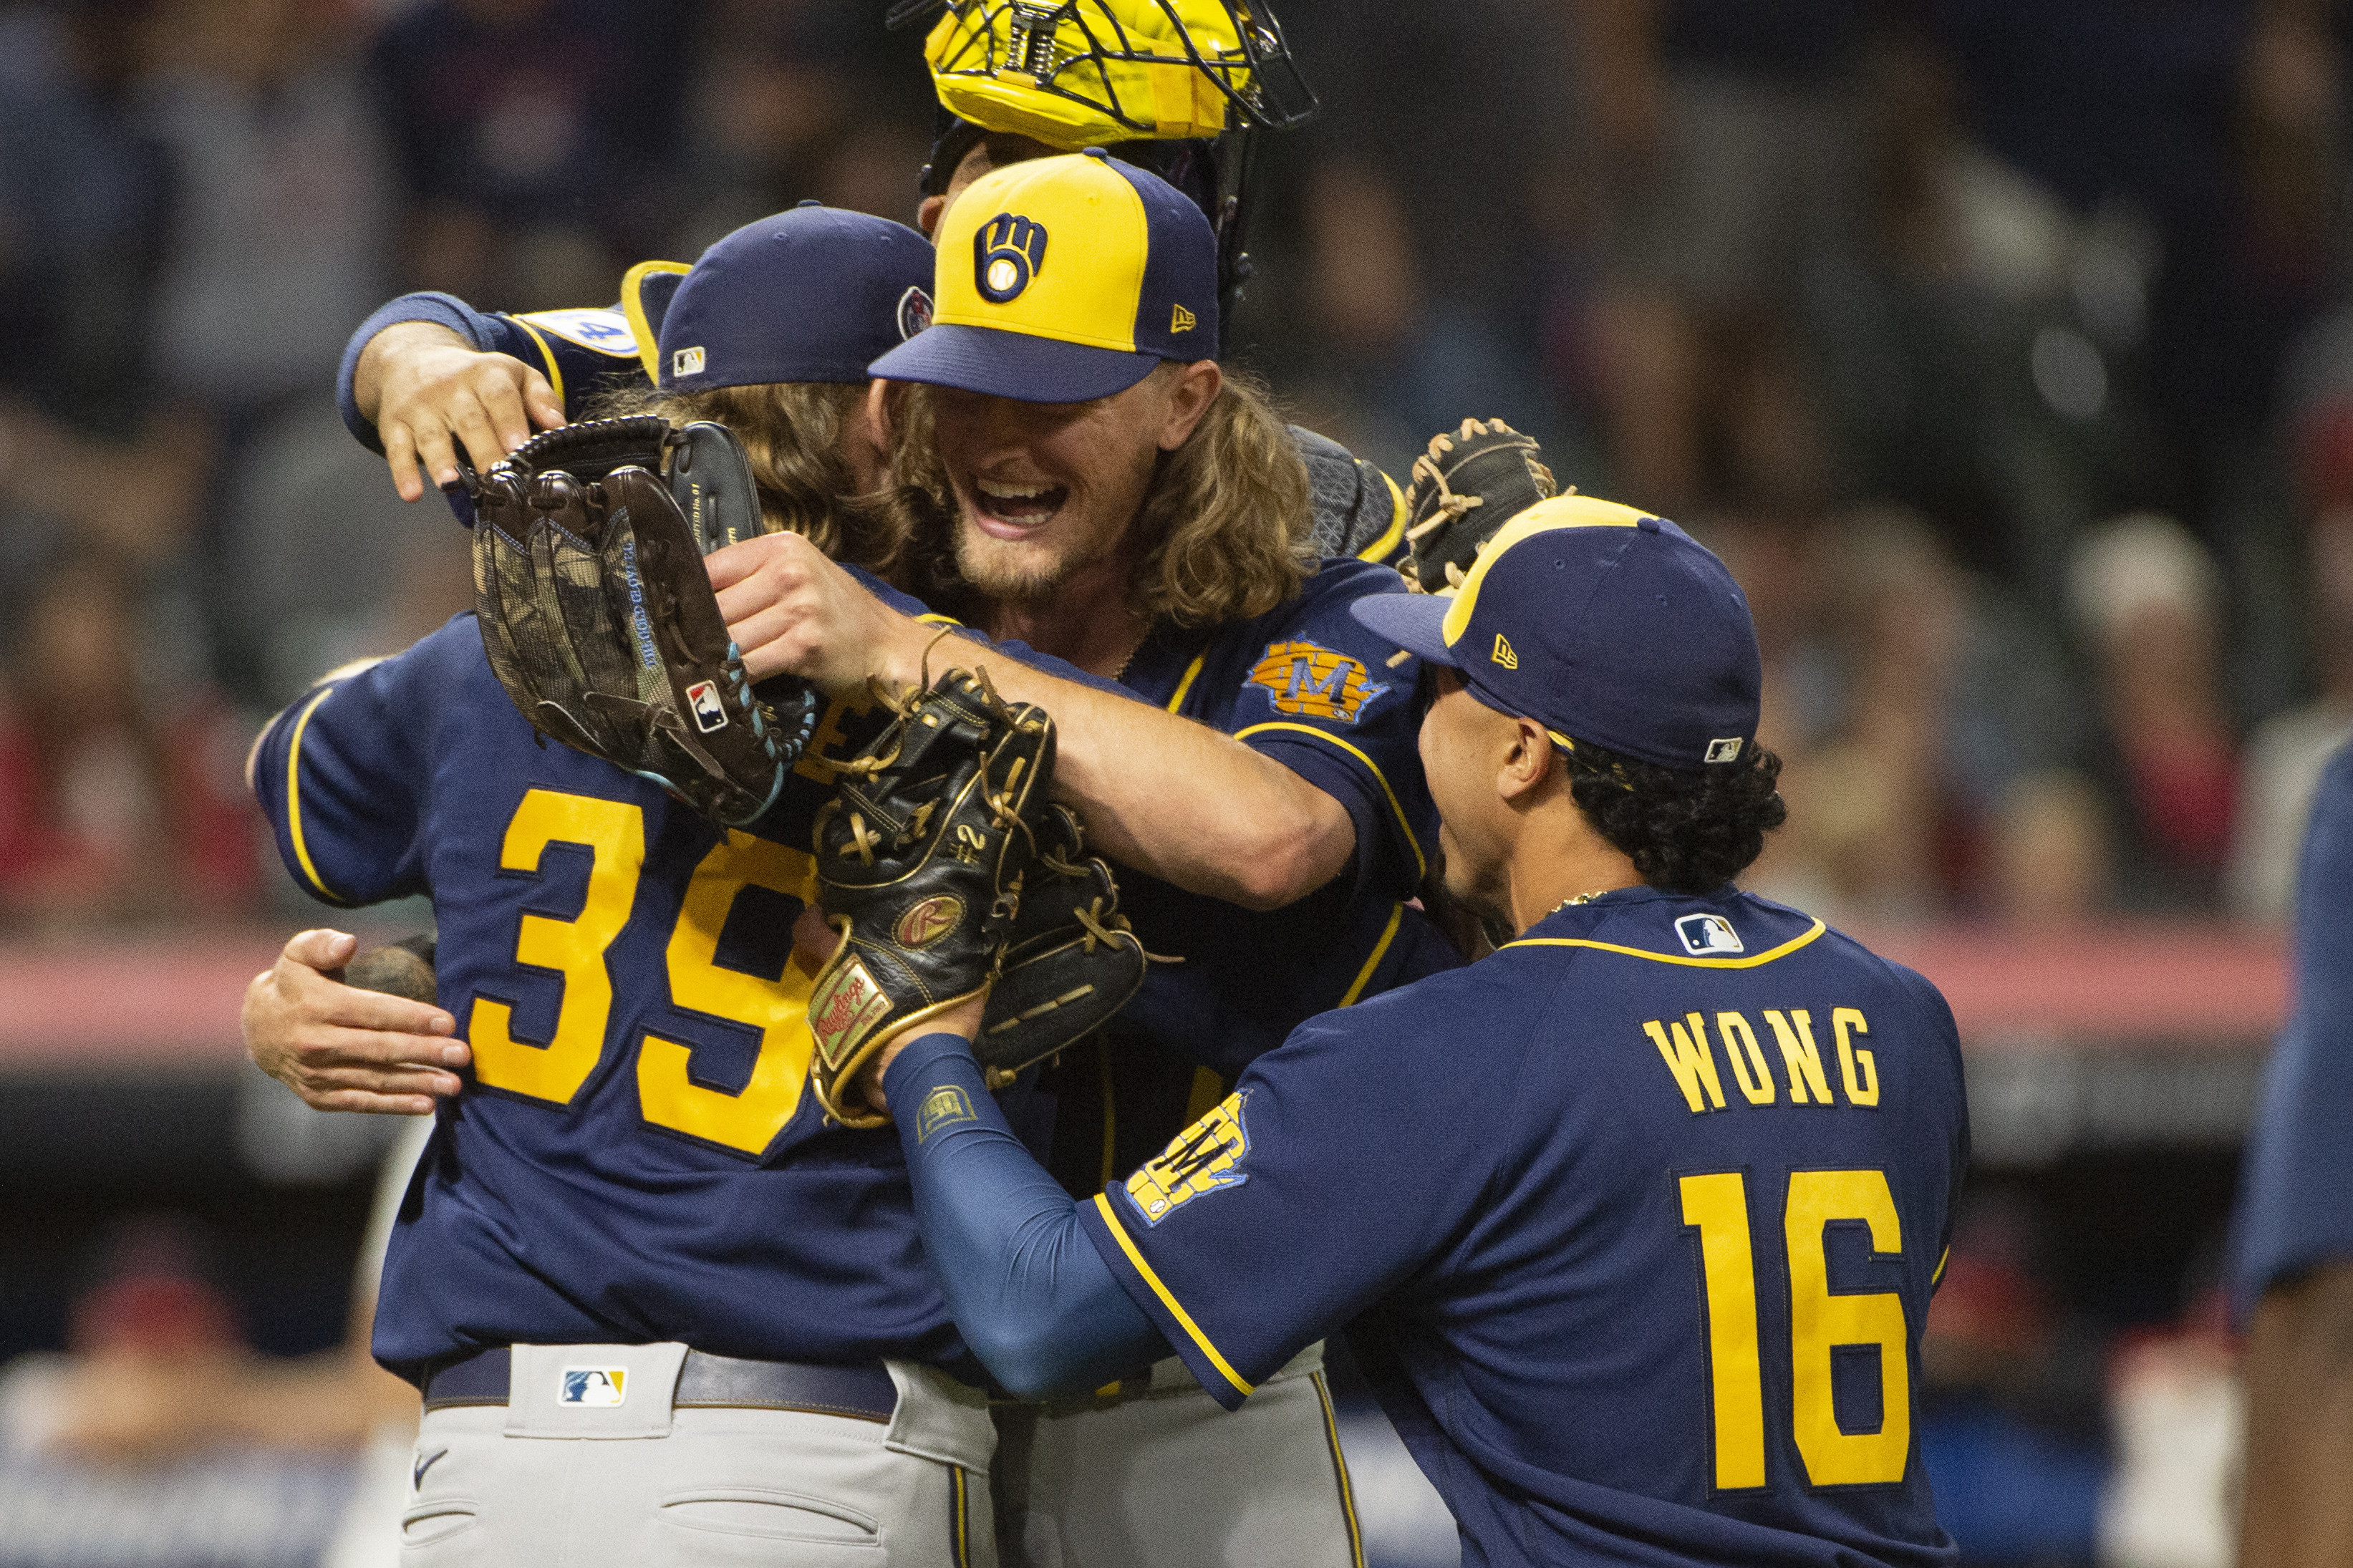 Brewers defeat Mets, win NL Central